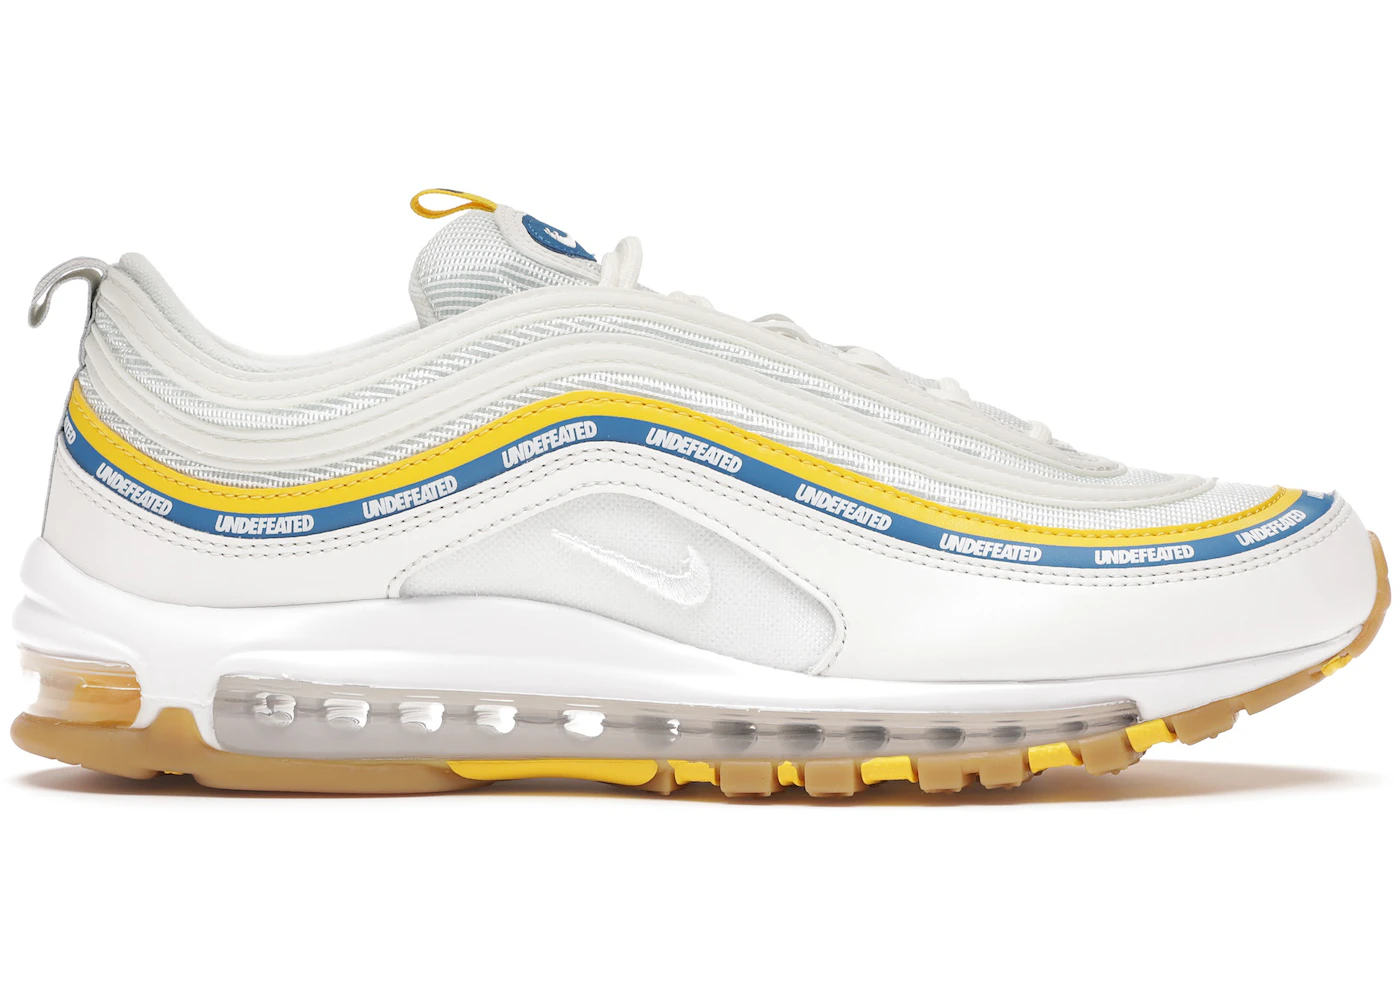 Nike Air Max 97 Undefeated UCLA Men's - DC4830-100 - US